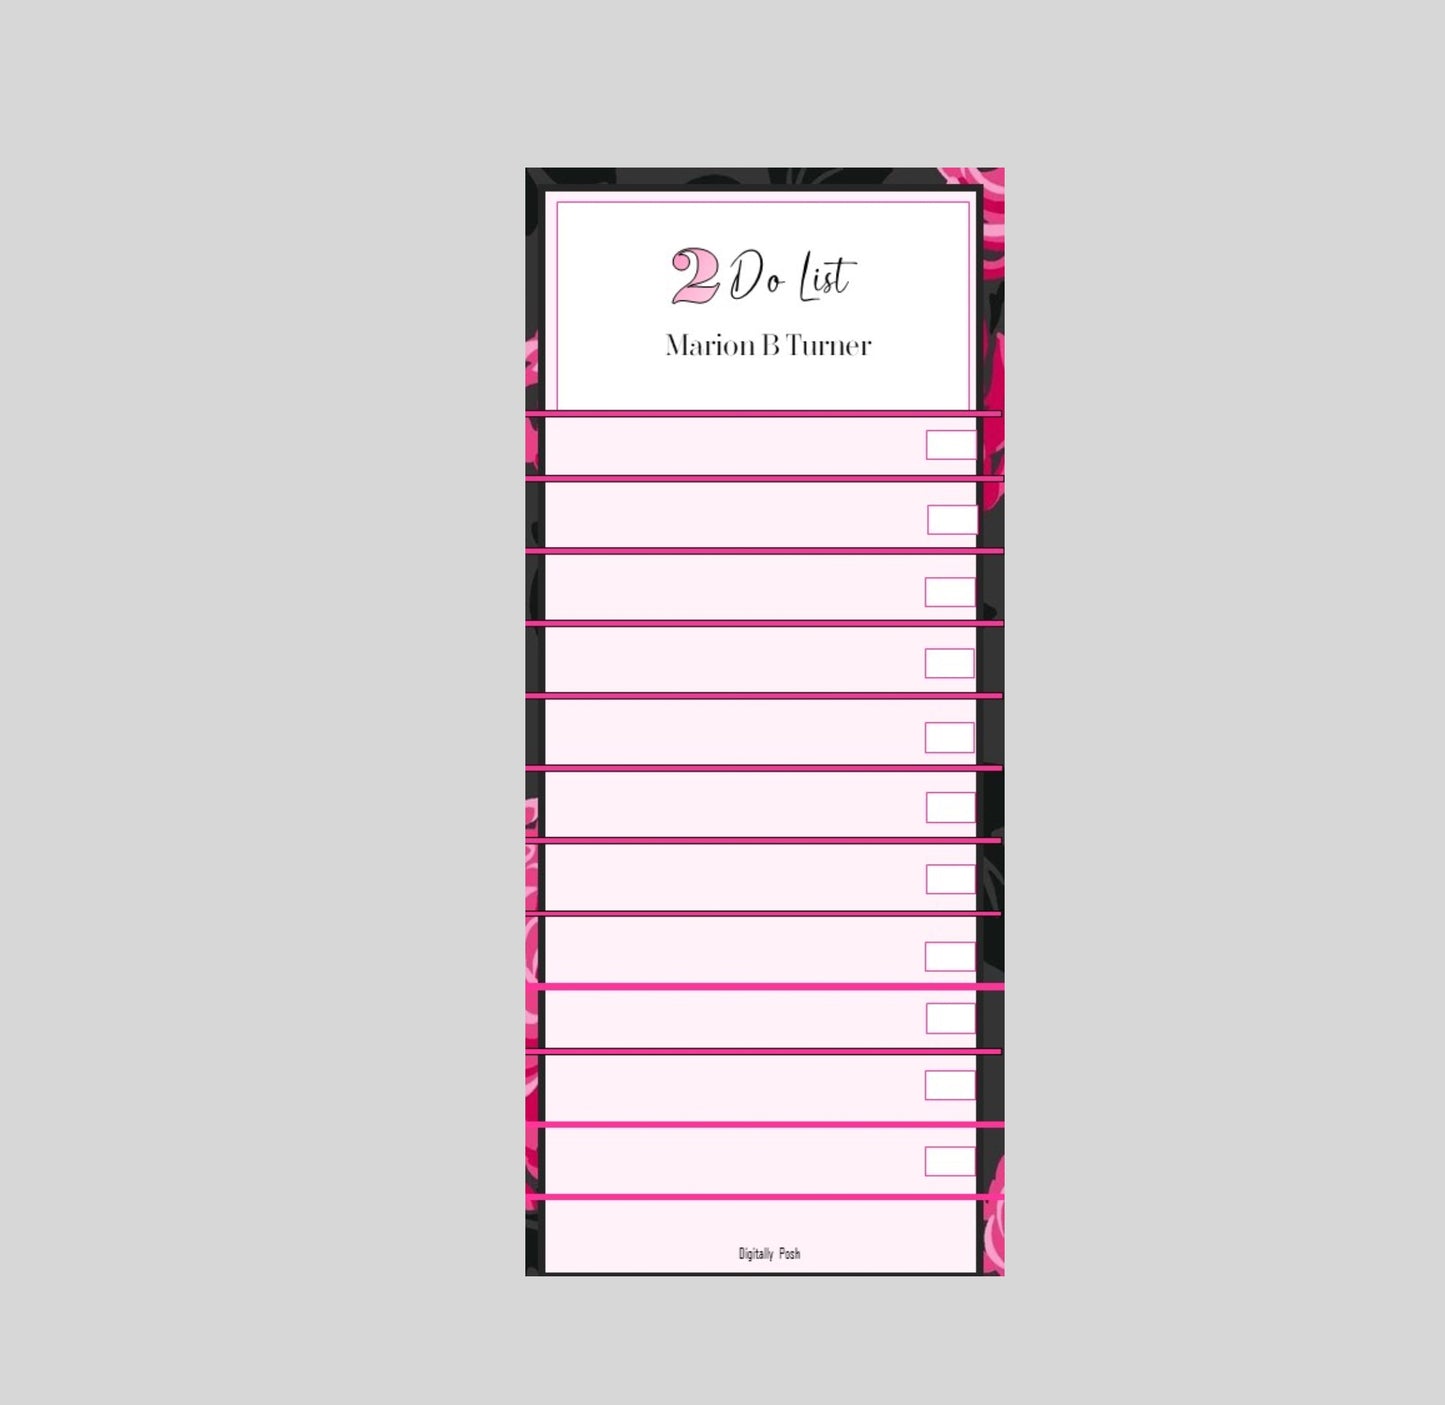 Personalized Notepad: To do list is a great way to stay organized; write down important information and tasks